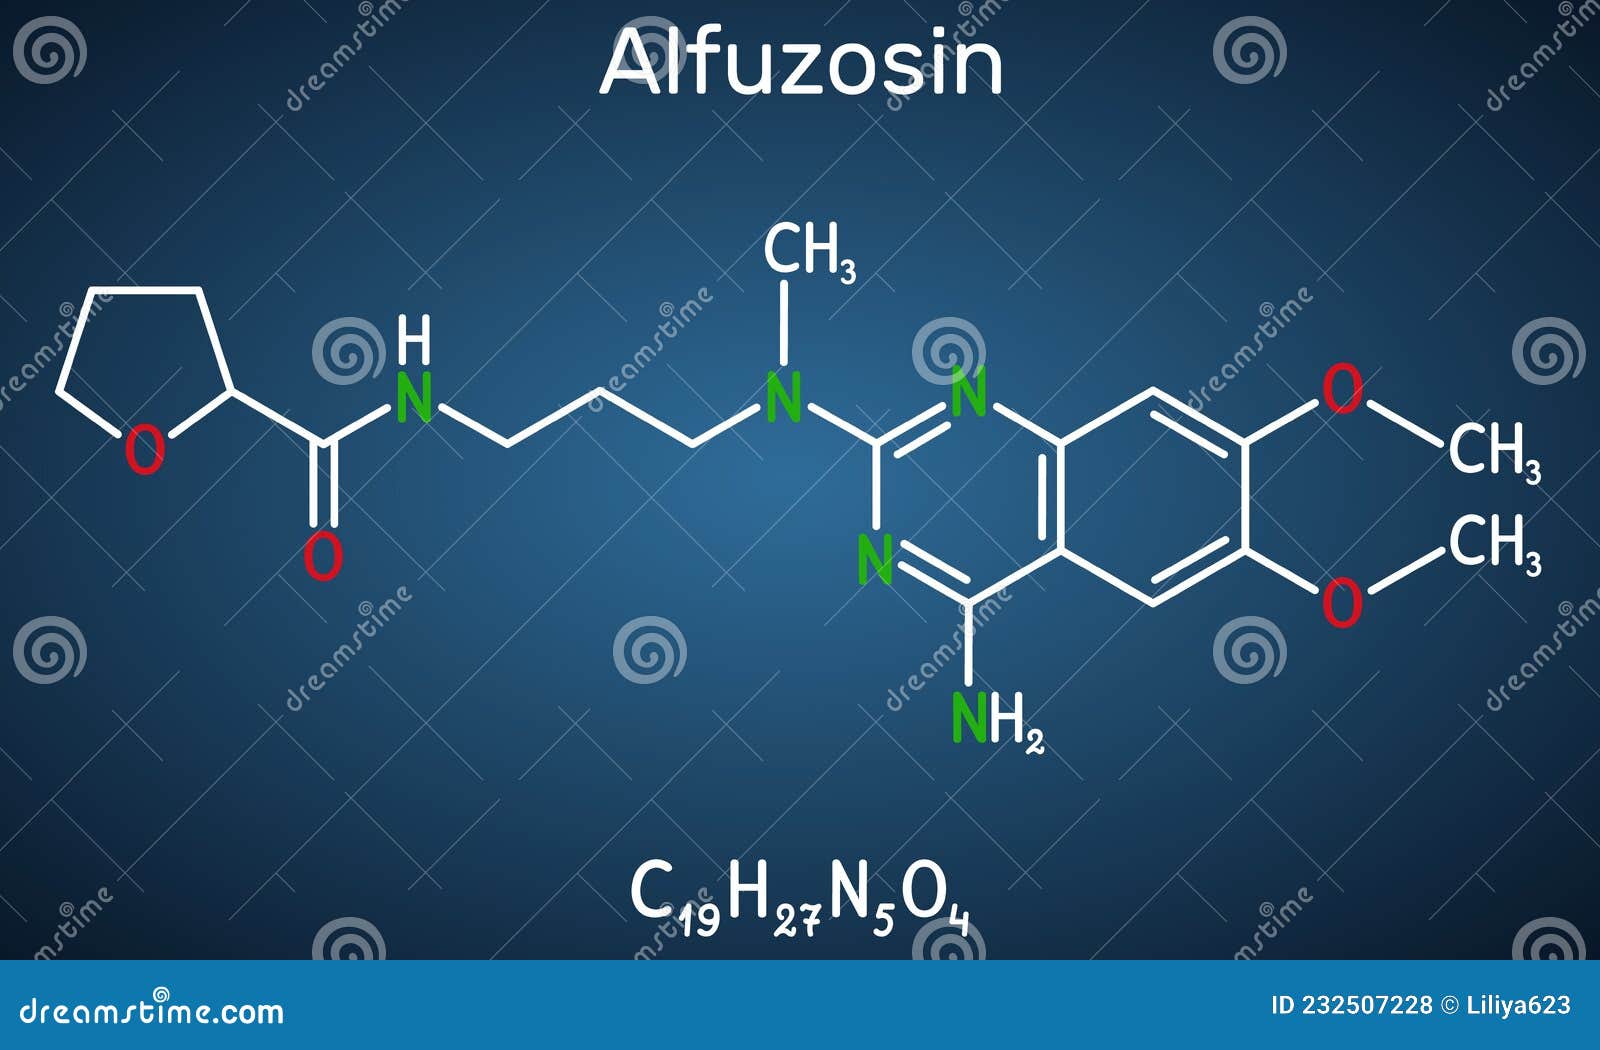 alfuzosin molecule. it is antineoplastic agent, an antihypertensive agent, an alpha-adrenergic antagonist. structural chemical